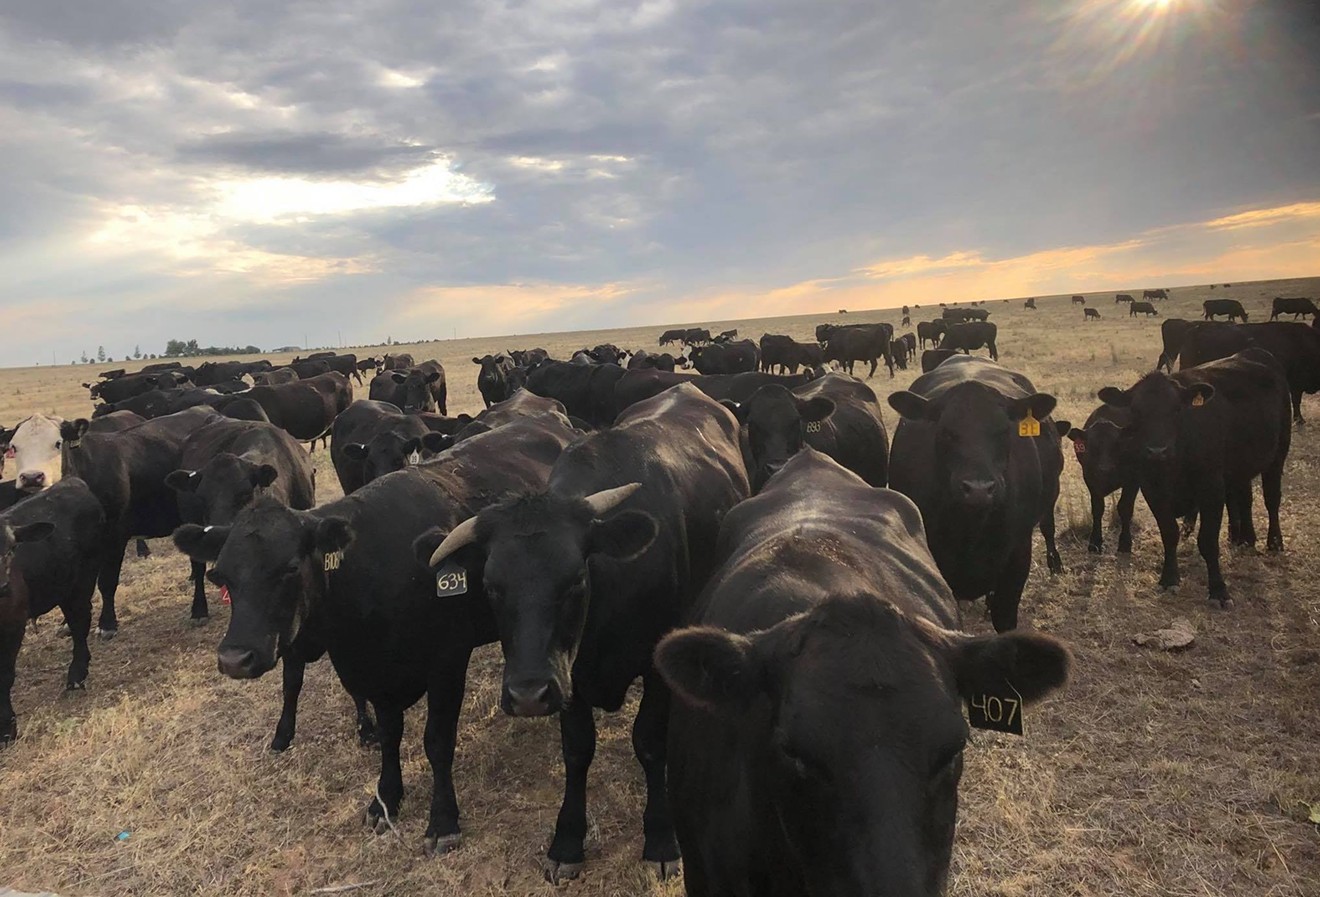 Some of the Angus-wagyu cattle at Flying B Bar Ranch.